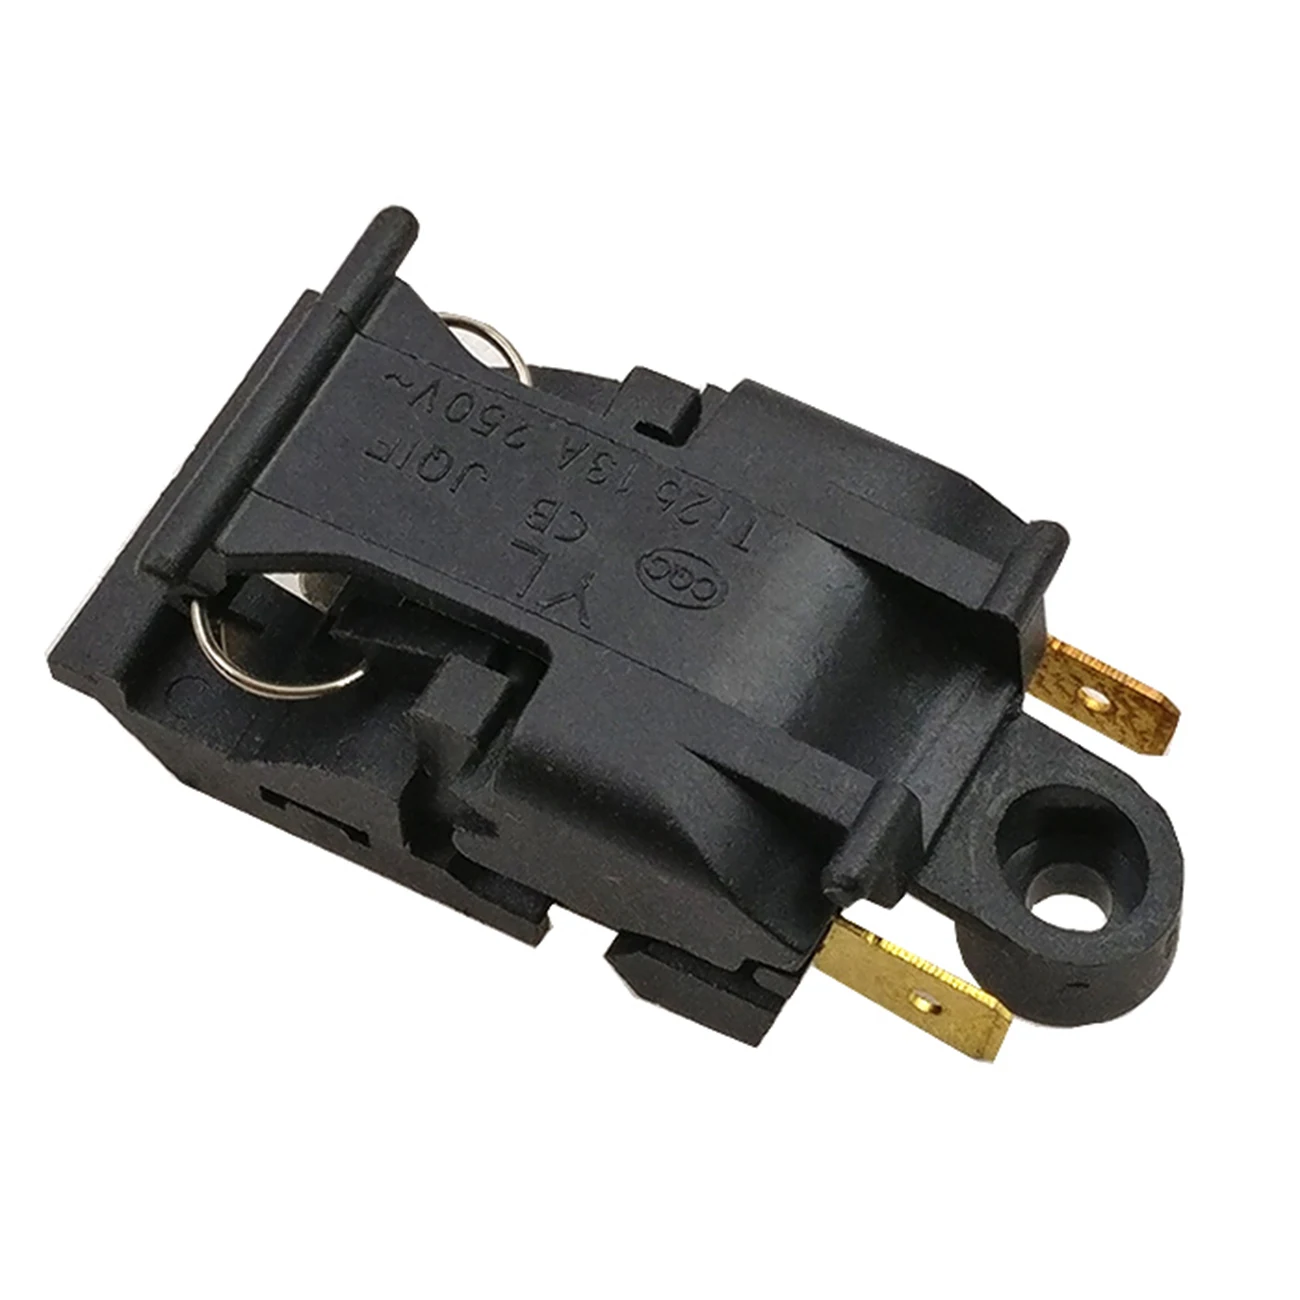 Details about   Kettle Electric Kettle Thermostat Switch TM-XD-3 100-240V 13A T125 SYHHH 